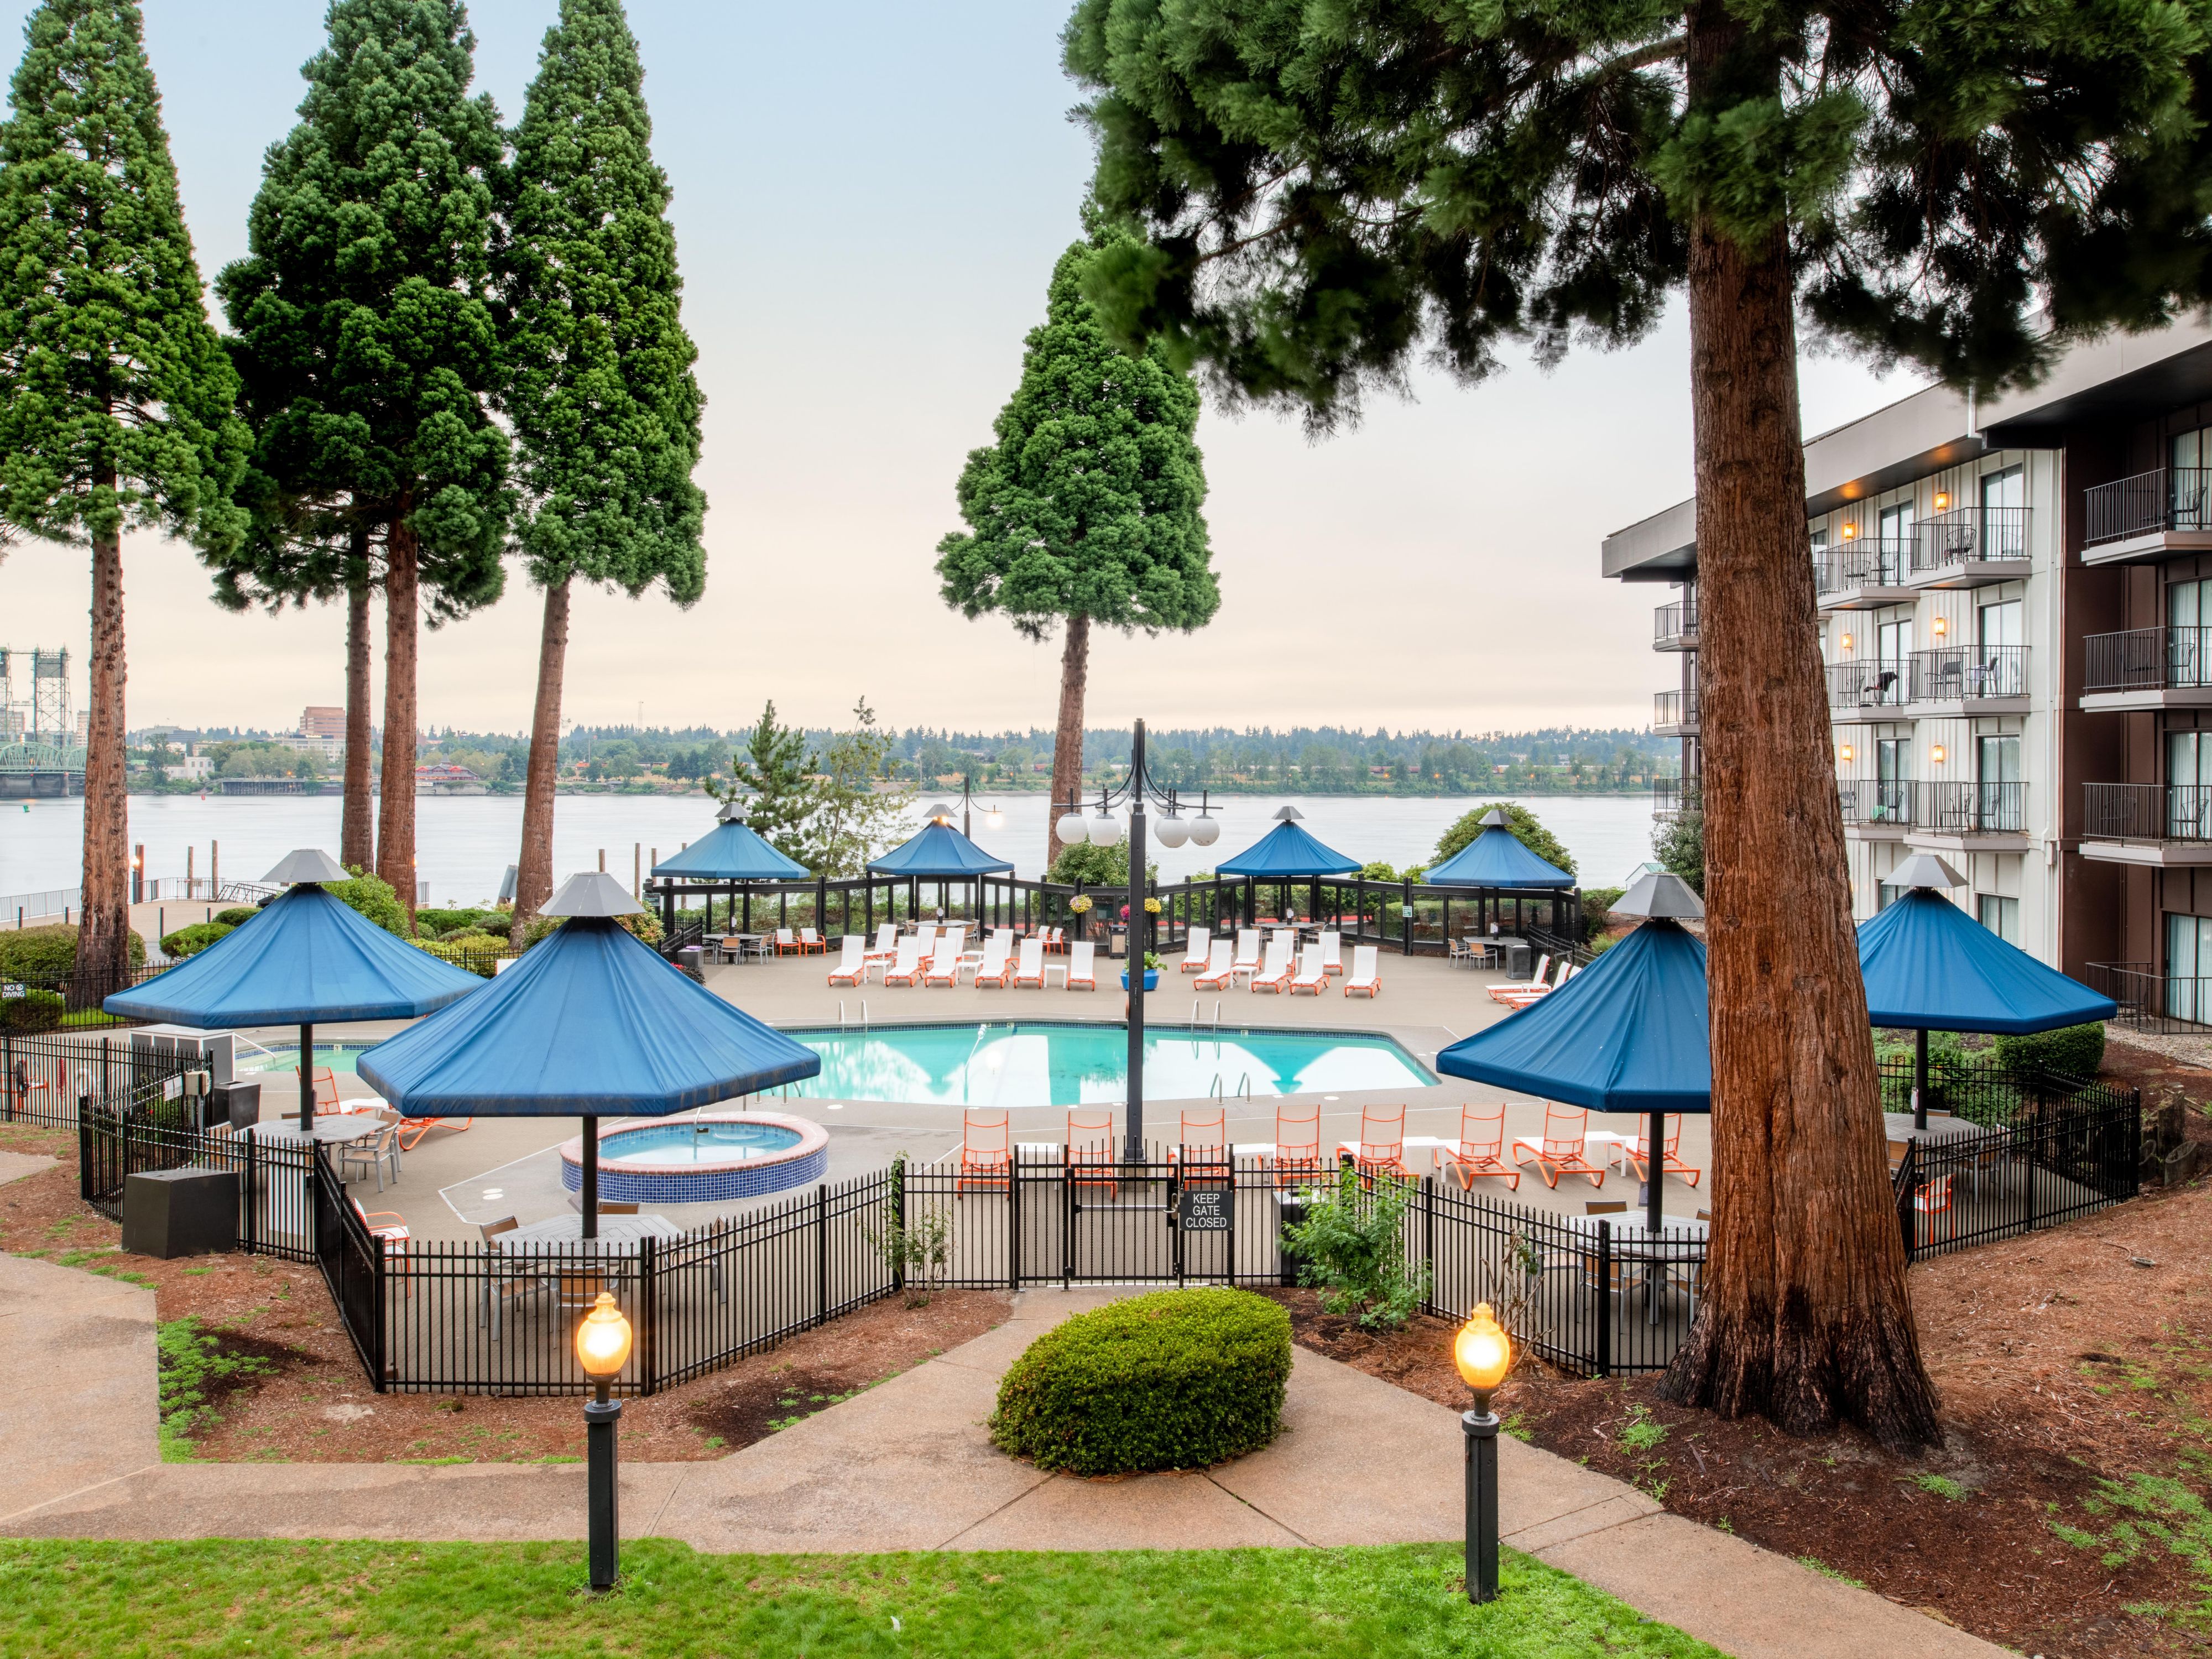 Relax & indulge in our heated outdoor pool & hot tub with poolside services. Play a game of tennis or pickleball on our riverside courts, or work out in our Fitness Center offering cardio and training equipment. Relax with a drink from the bar and enjoy views of the Columbia River. Experience our resort-style ambiance along the Portland riverfront.